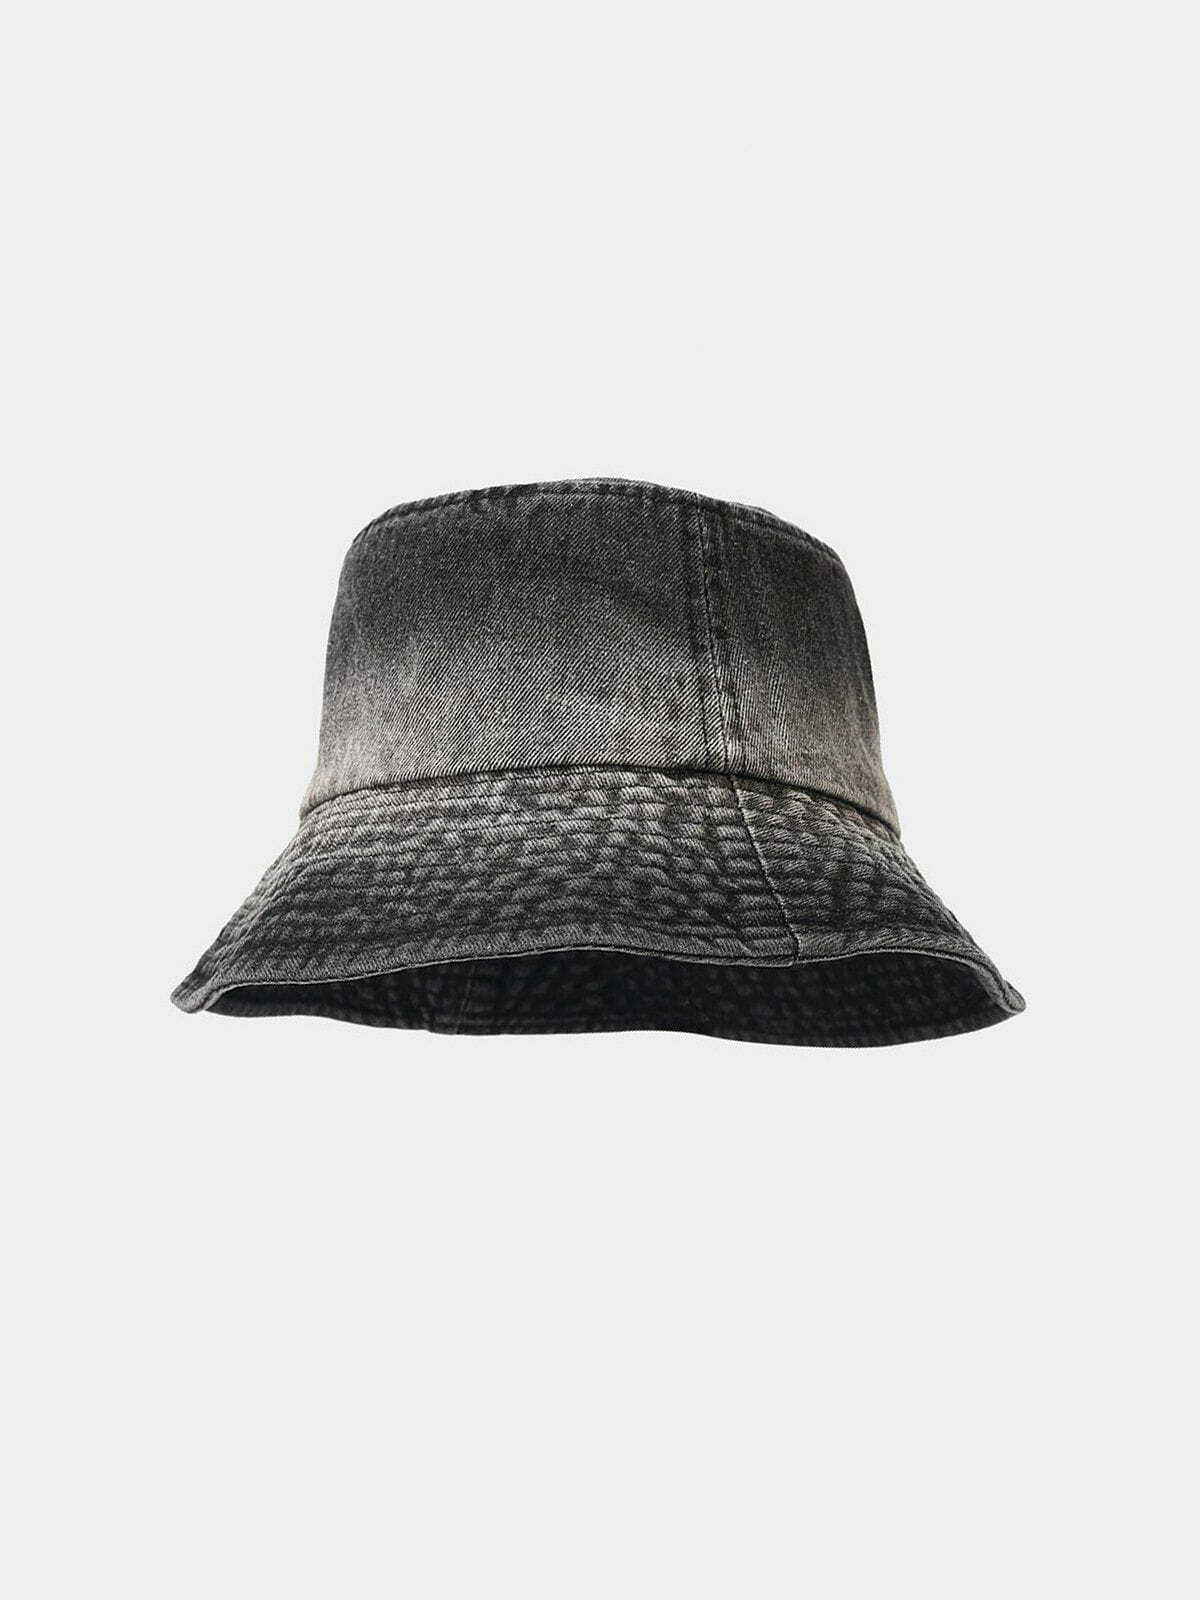 vintage color contrast hat   chic washed streetwear look 4917